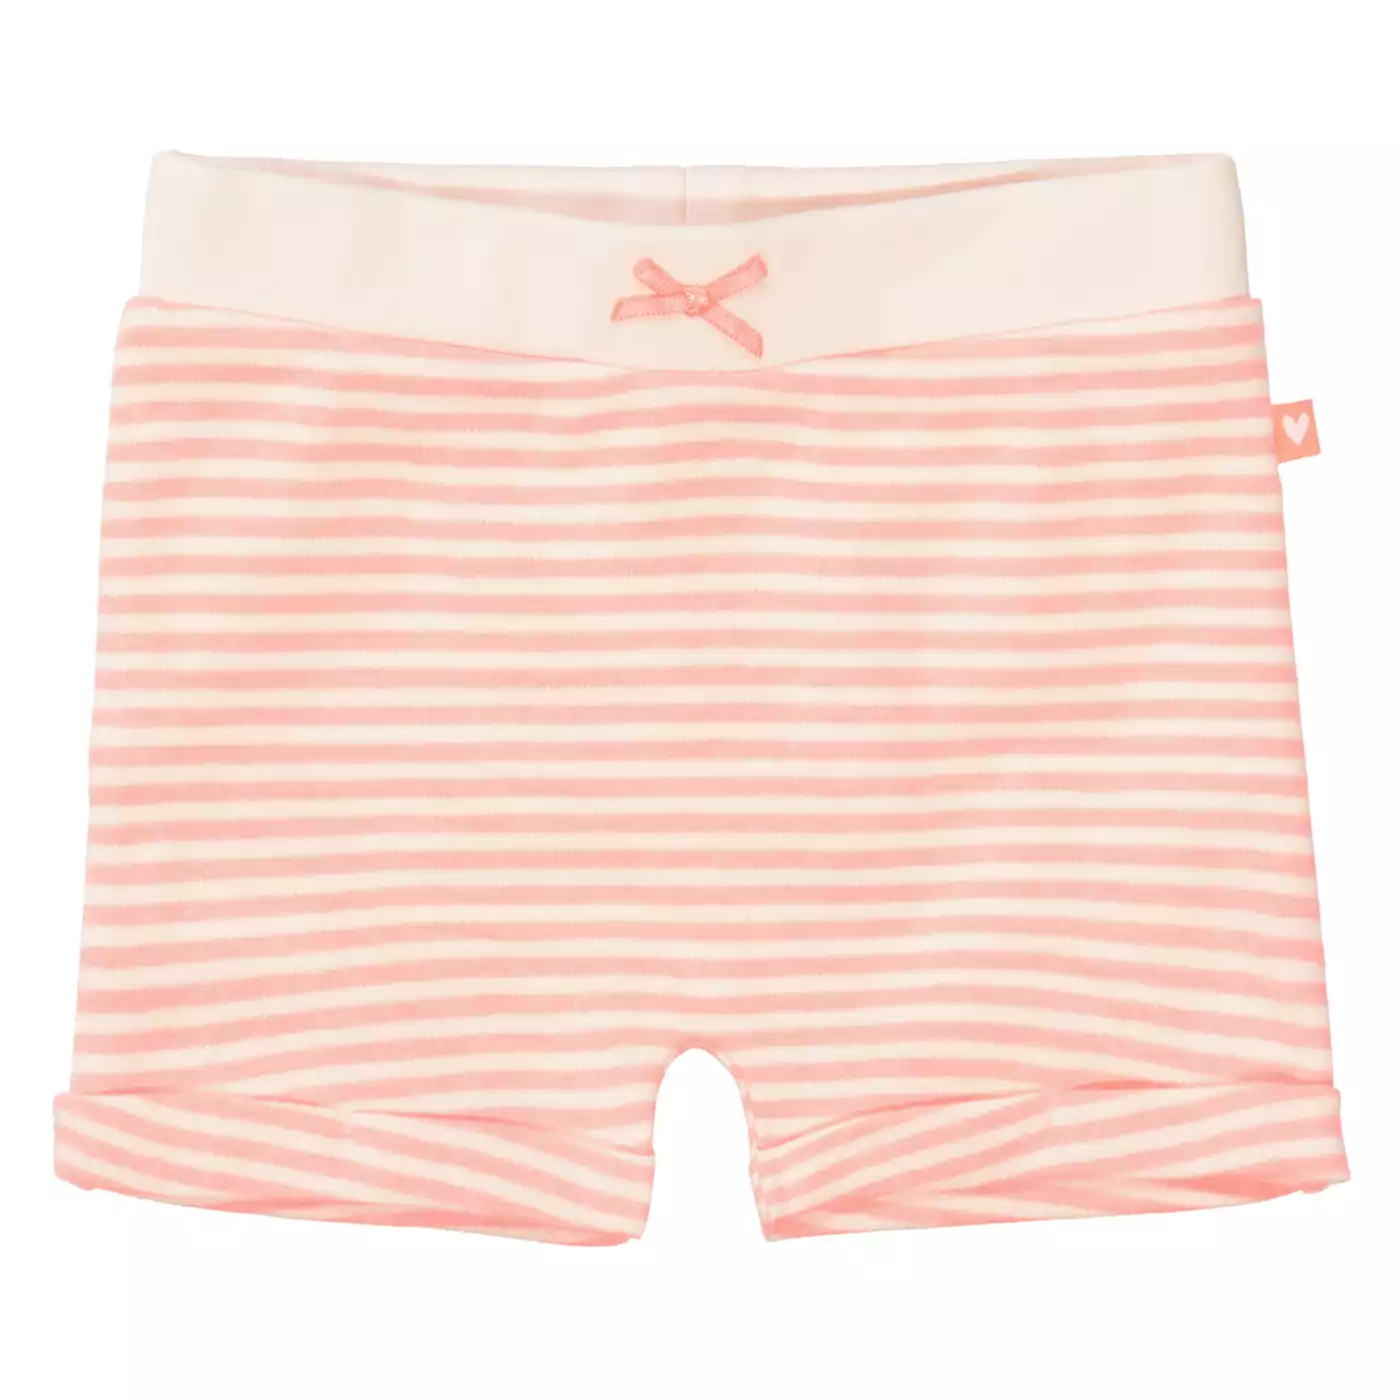 Shorts Neon Coral STACCATO Pink Rosa 2005580296100 3